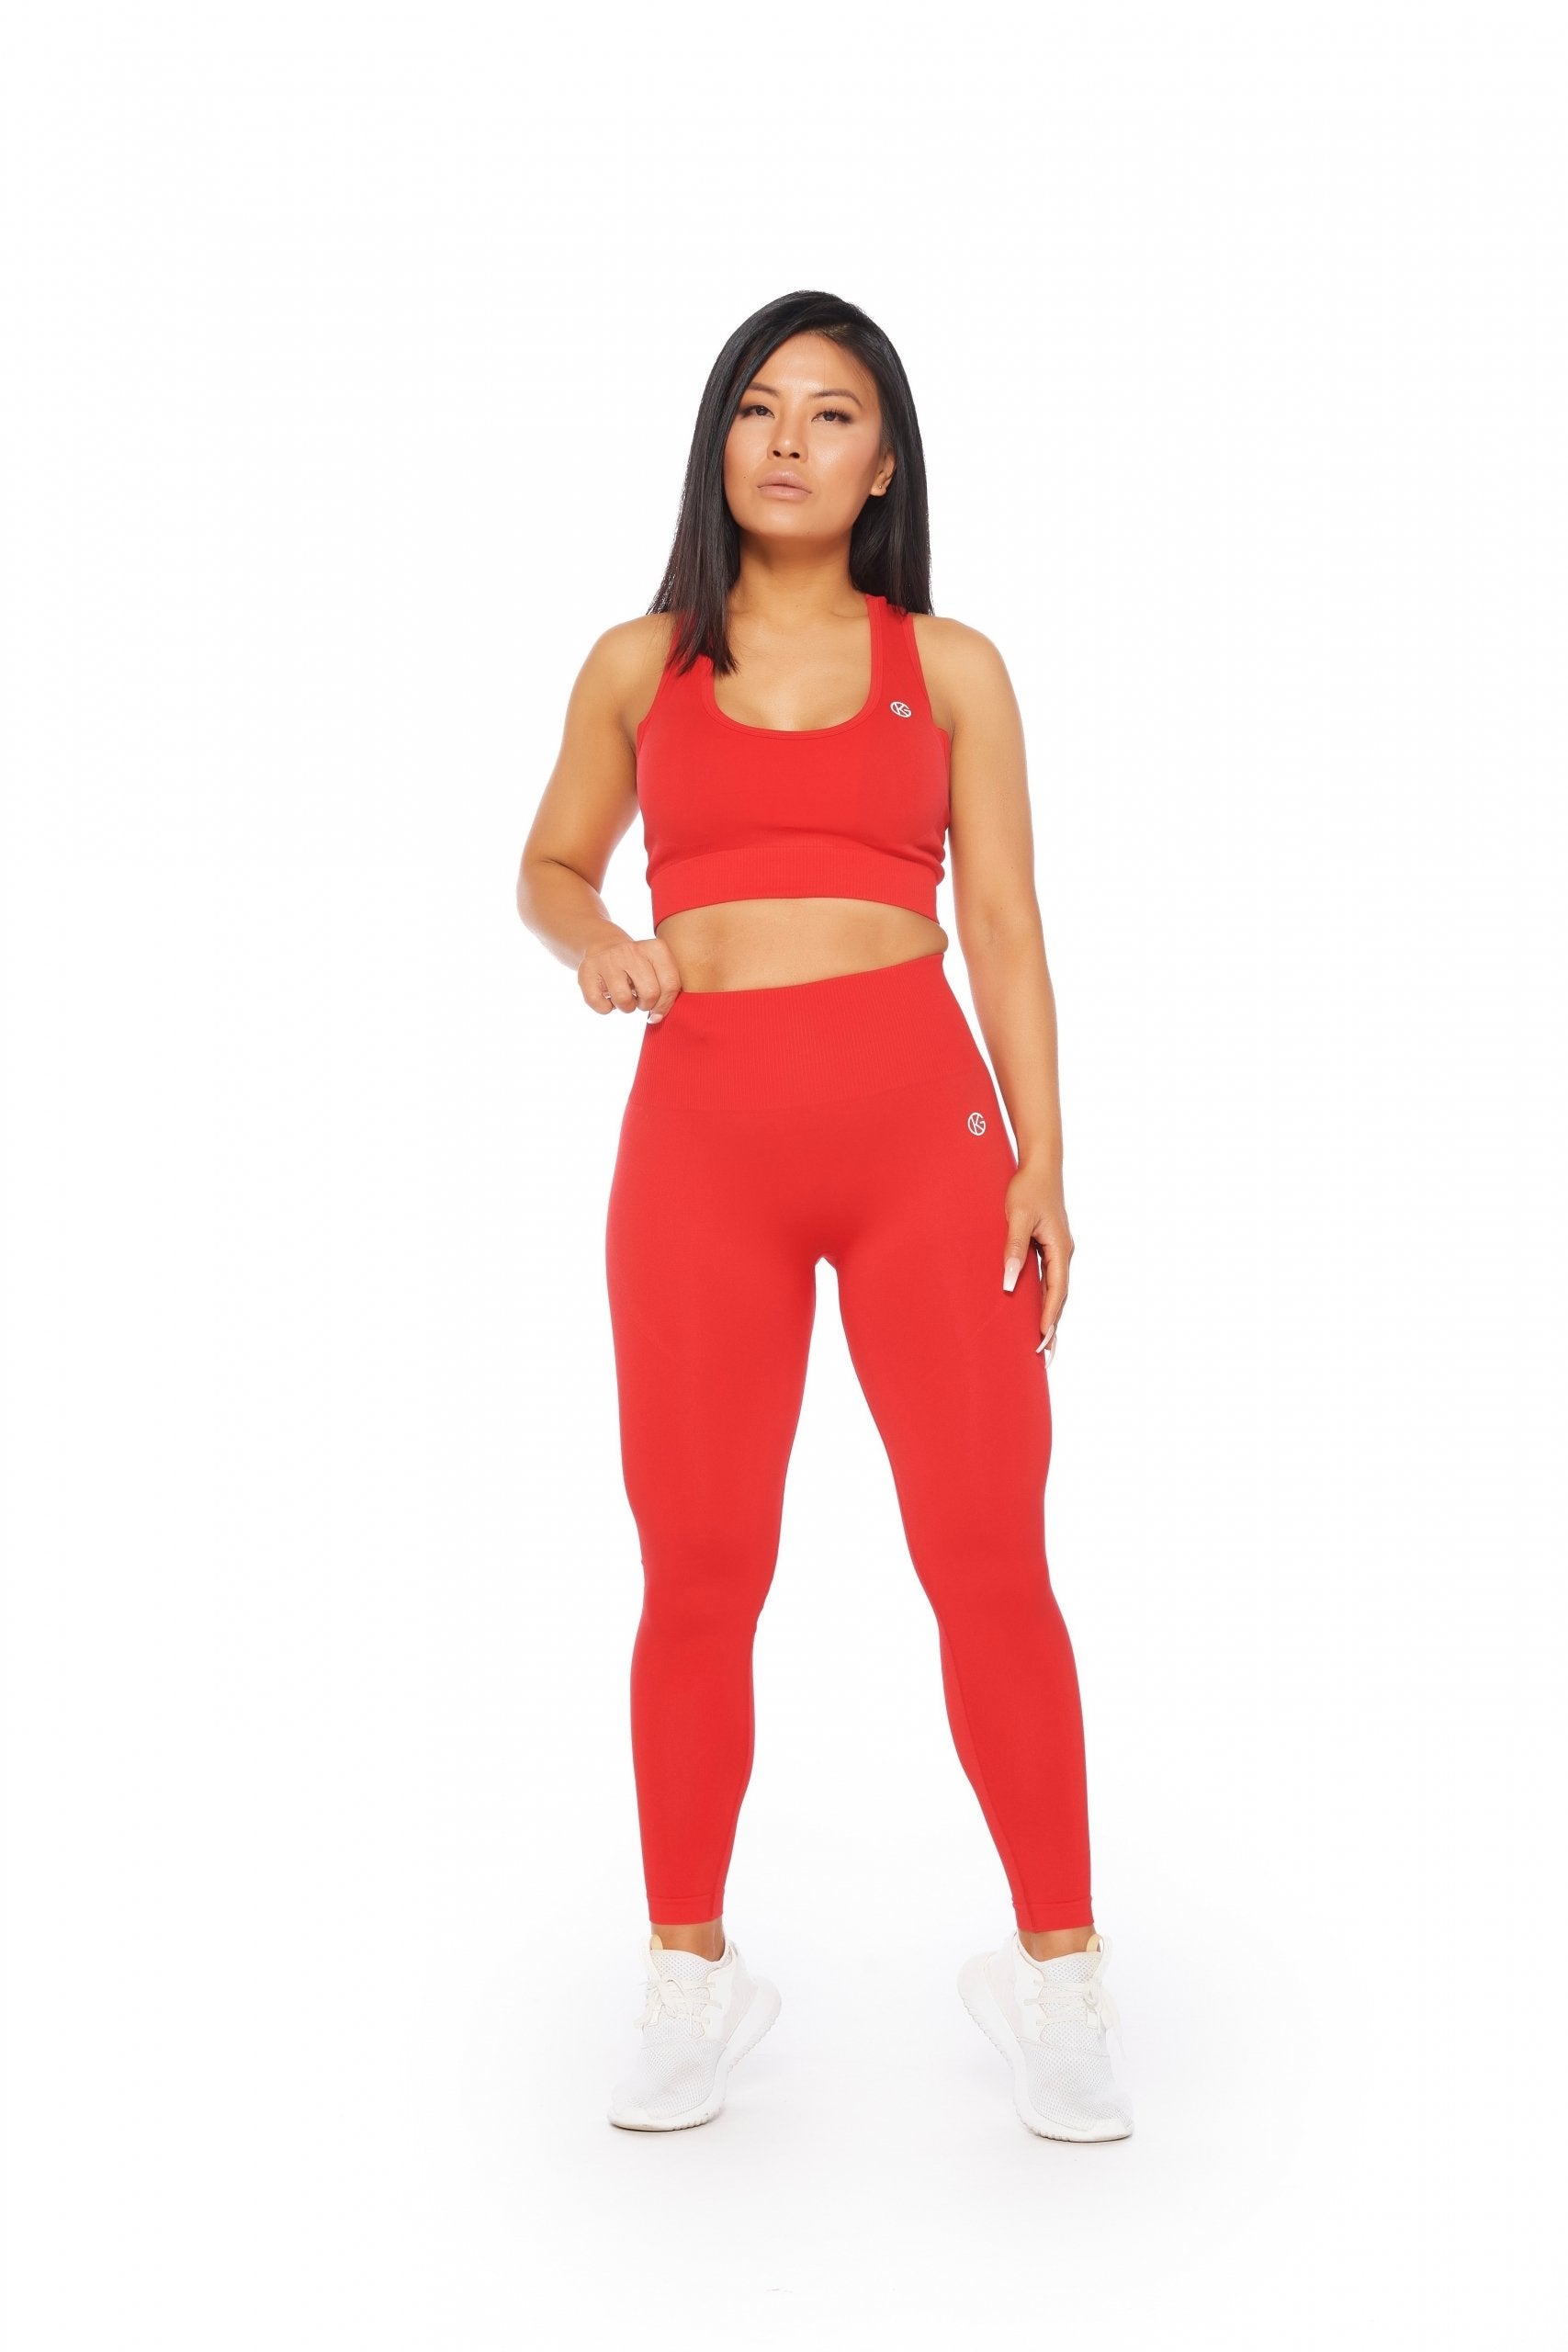 kategalliano.com SEAMLESS Leggings - Candy Red